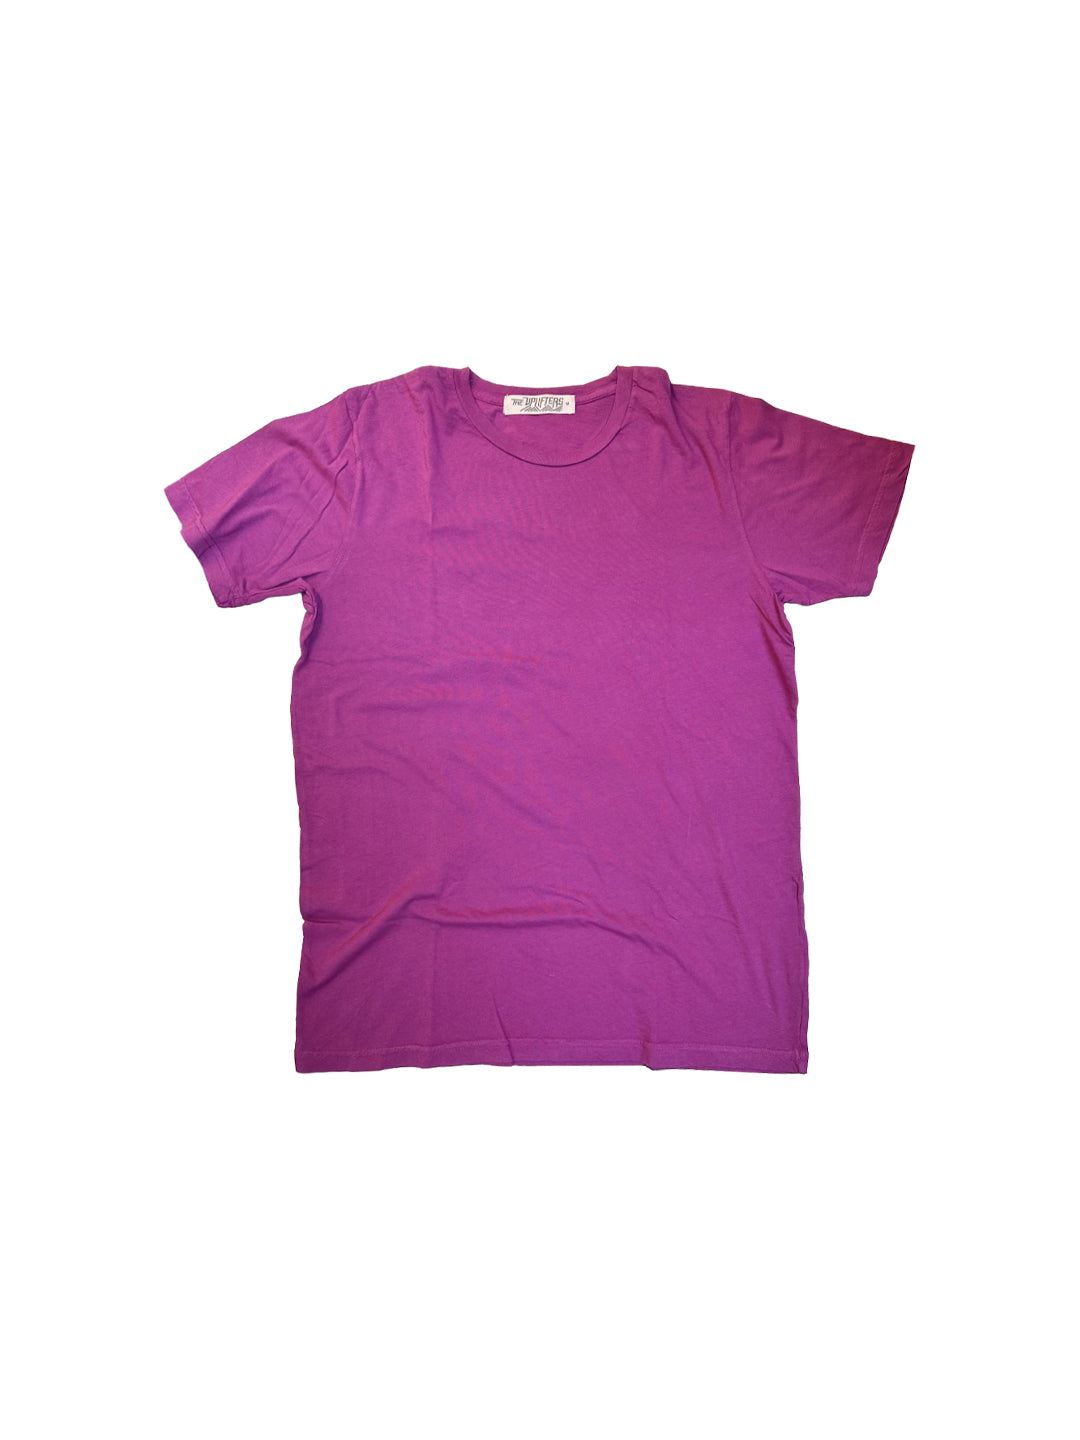 Canyon School Is Cool Youth Tee in Grape